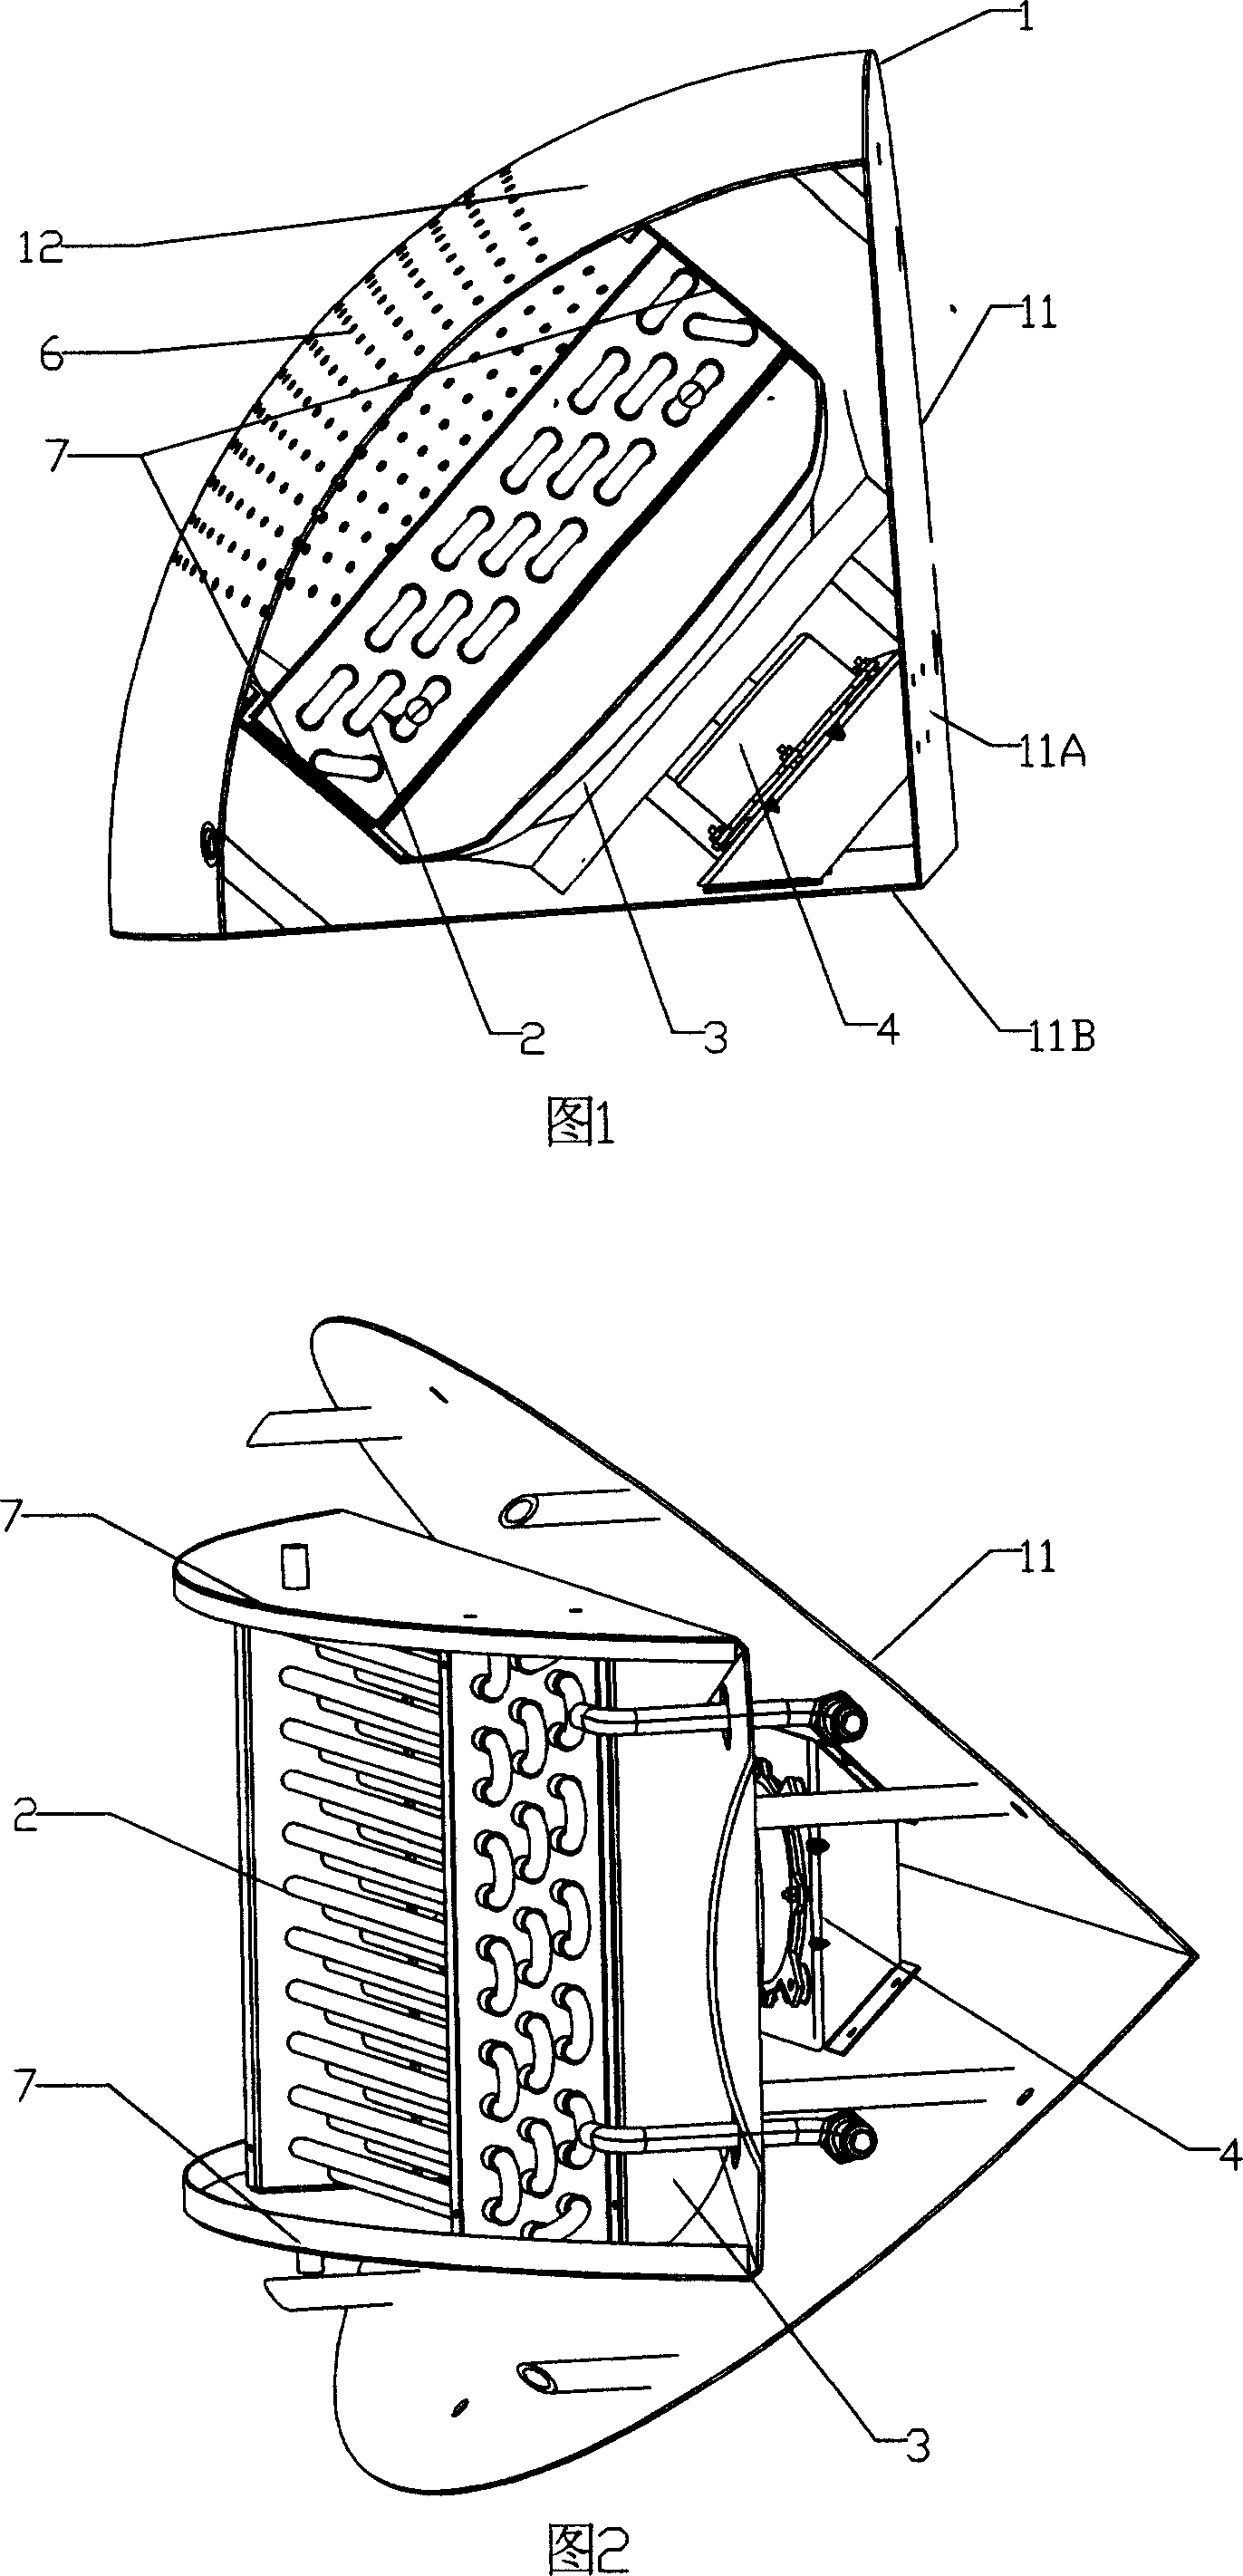 Indoor unit of separated wall air-conditioner